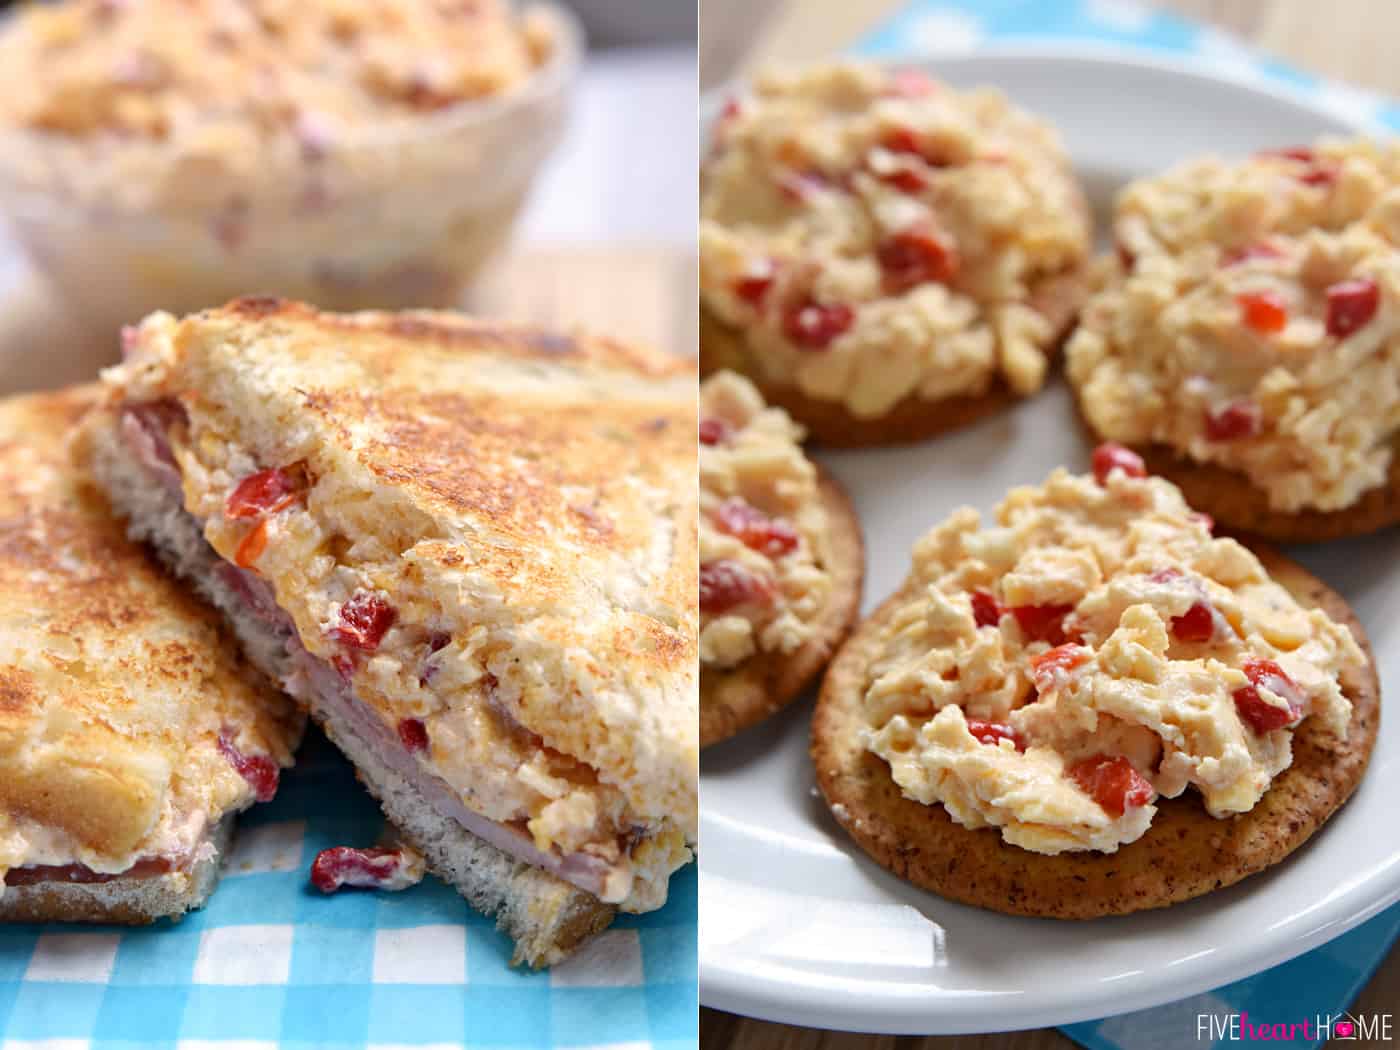 Other ways to enjoy pimento cheese, such as in a sandwich or spread on crackers.